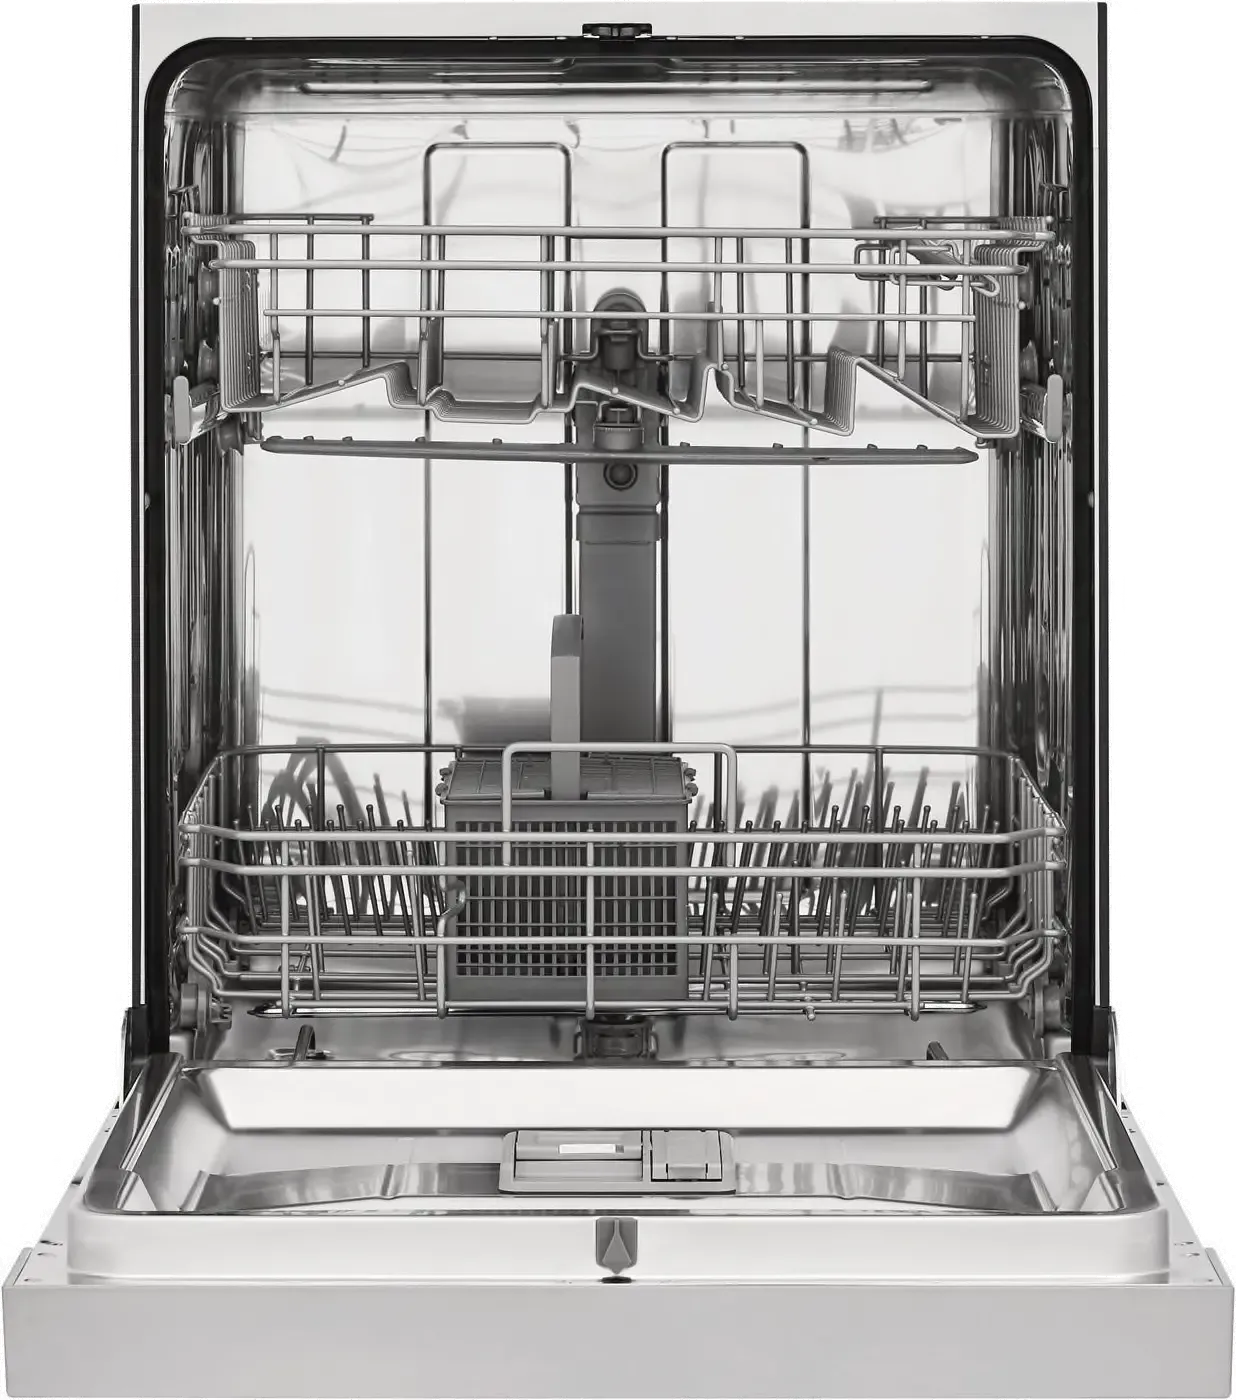 Frigidaire Front Control Dishwasher - Stainless Steel